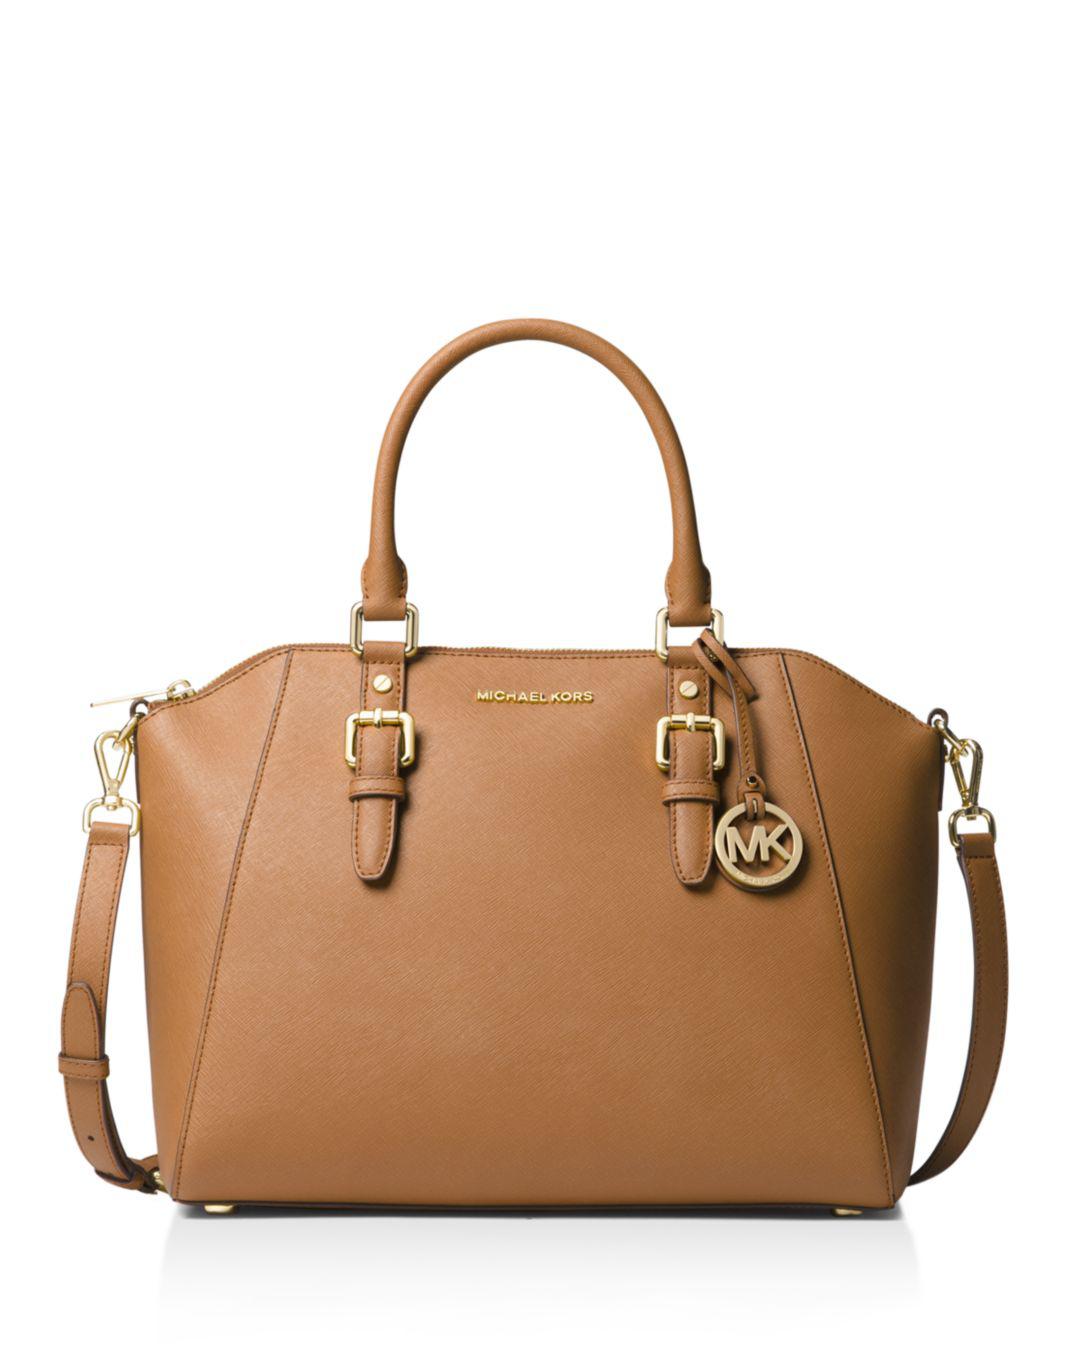 ciara large saffiano leather satchel review